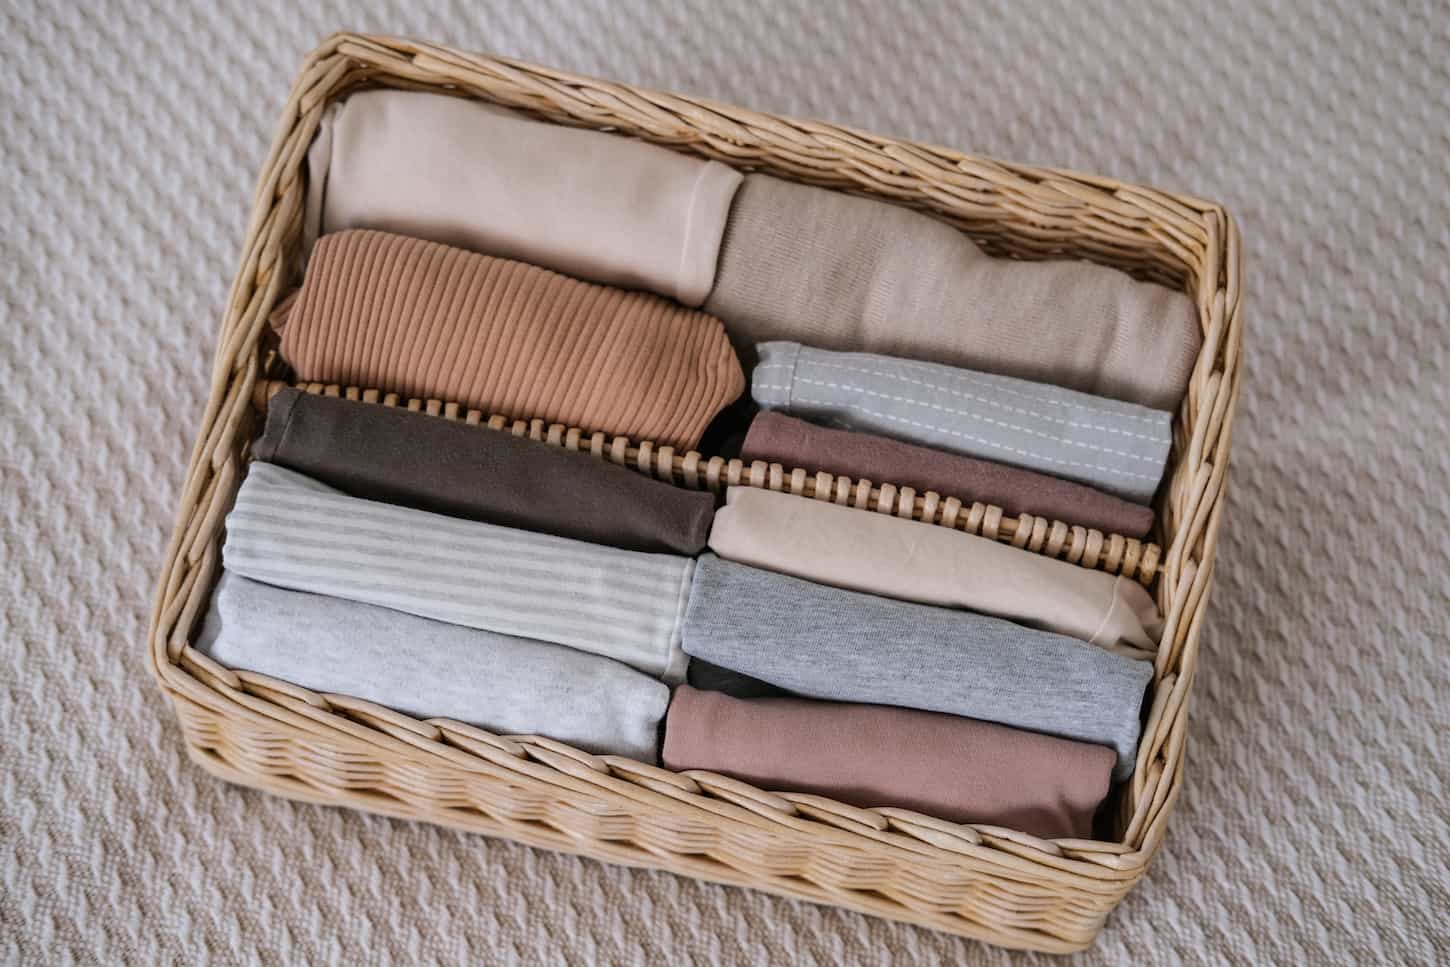 An image of Baby clothes in a wicker container.